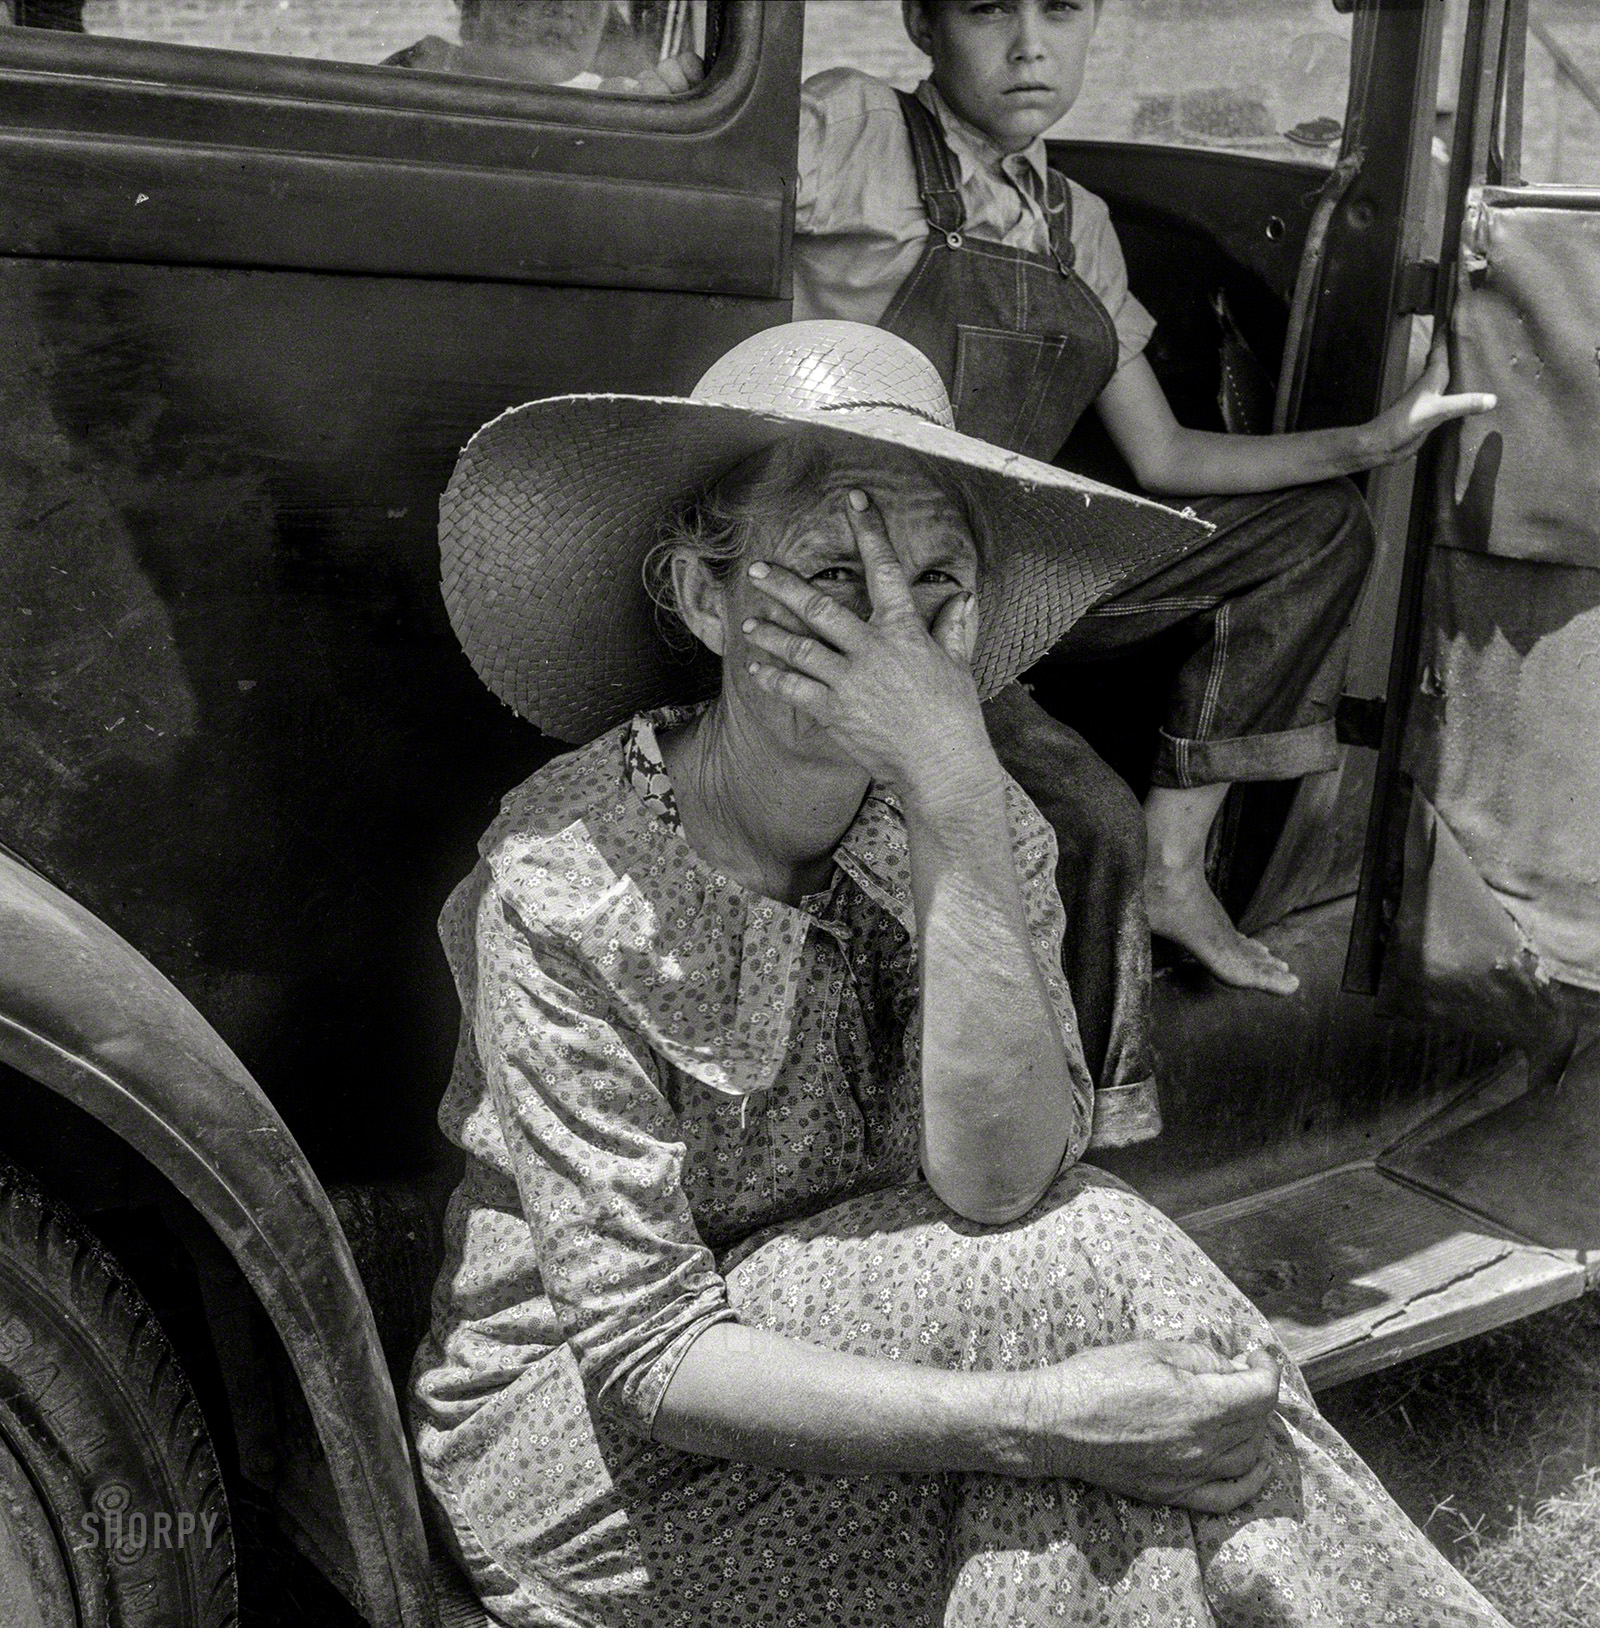 July 1938. Douglas, Georgia. "Wife of sharecropper in town to sell their crop at the tobacco auction." Medium format negative by Dorothea Lange. View full size.